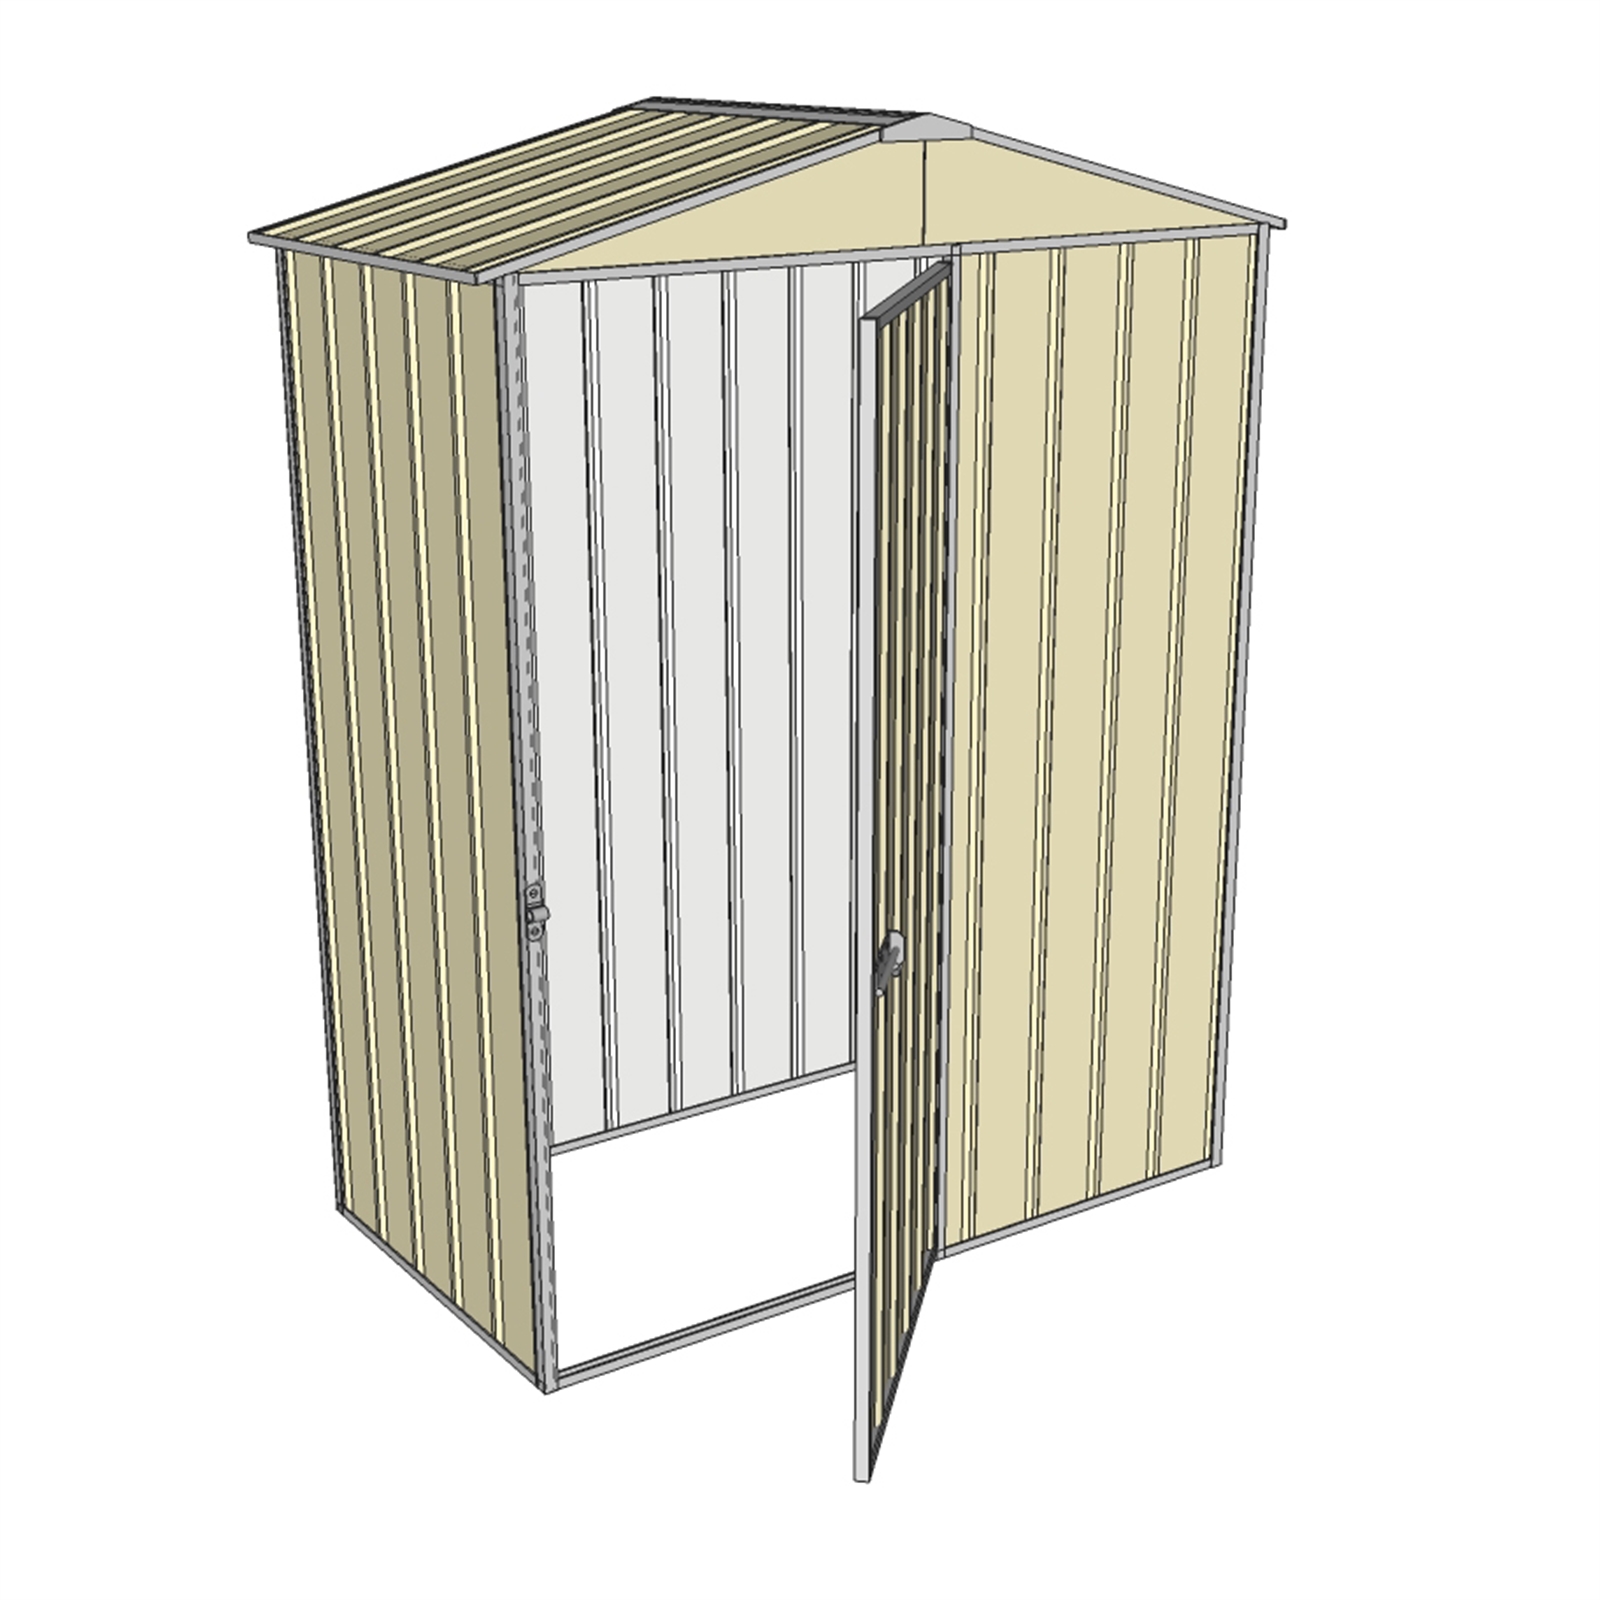 Build-a-Shed 1.5 x 2.3 x 0.8m Cream Front Gable Single Hinged Door Narrow Shed